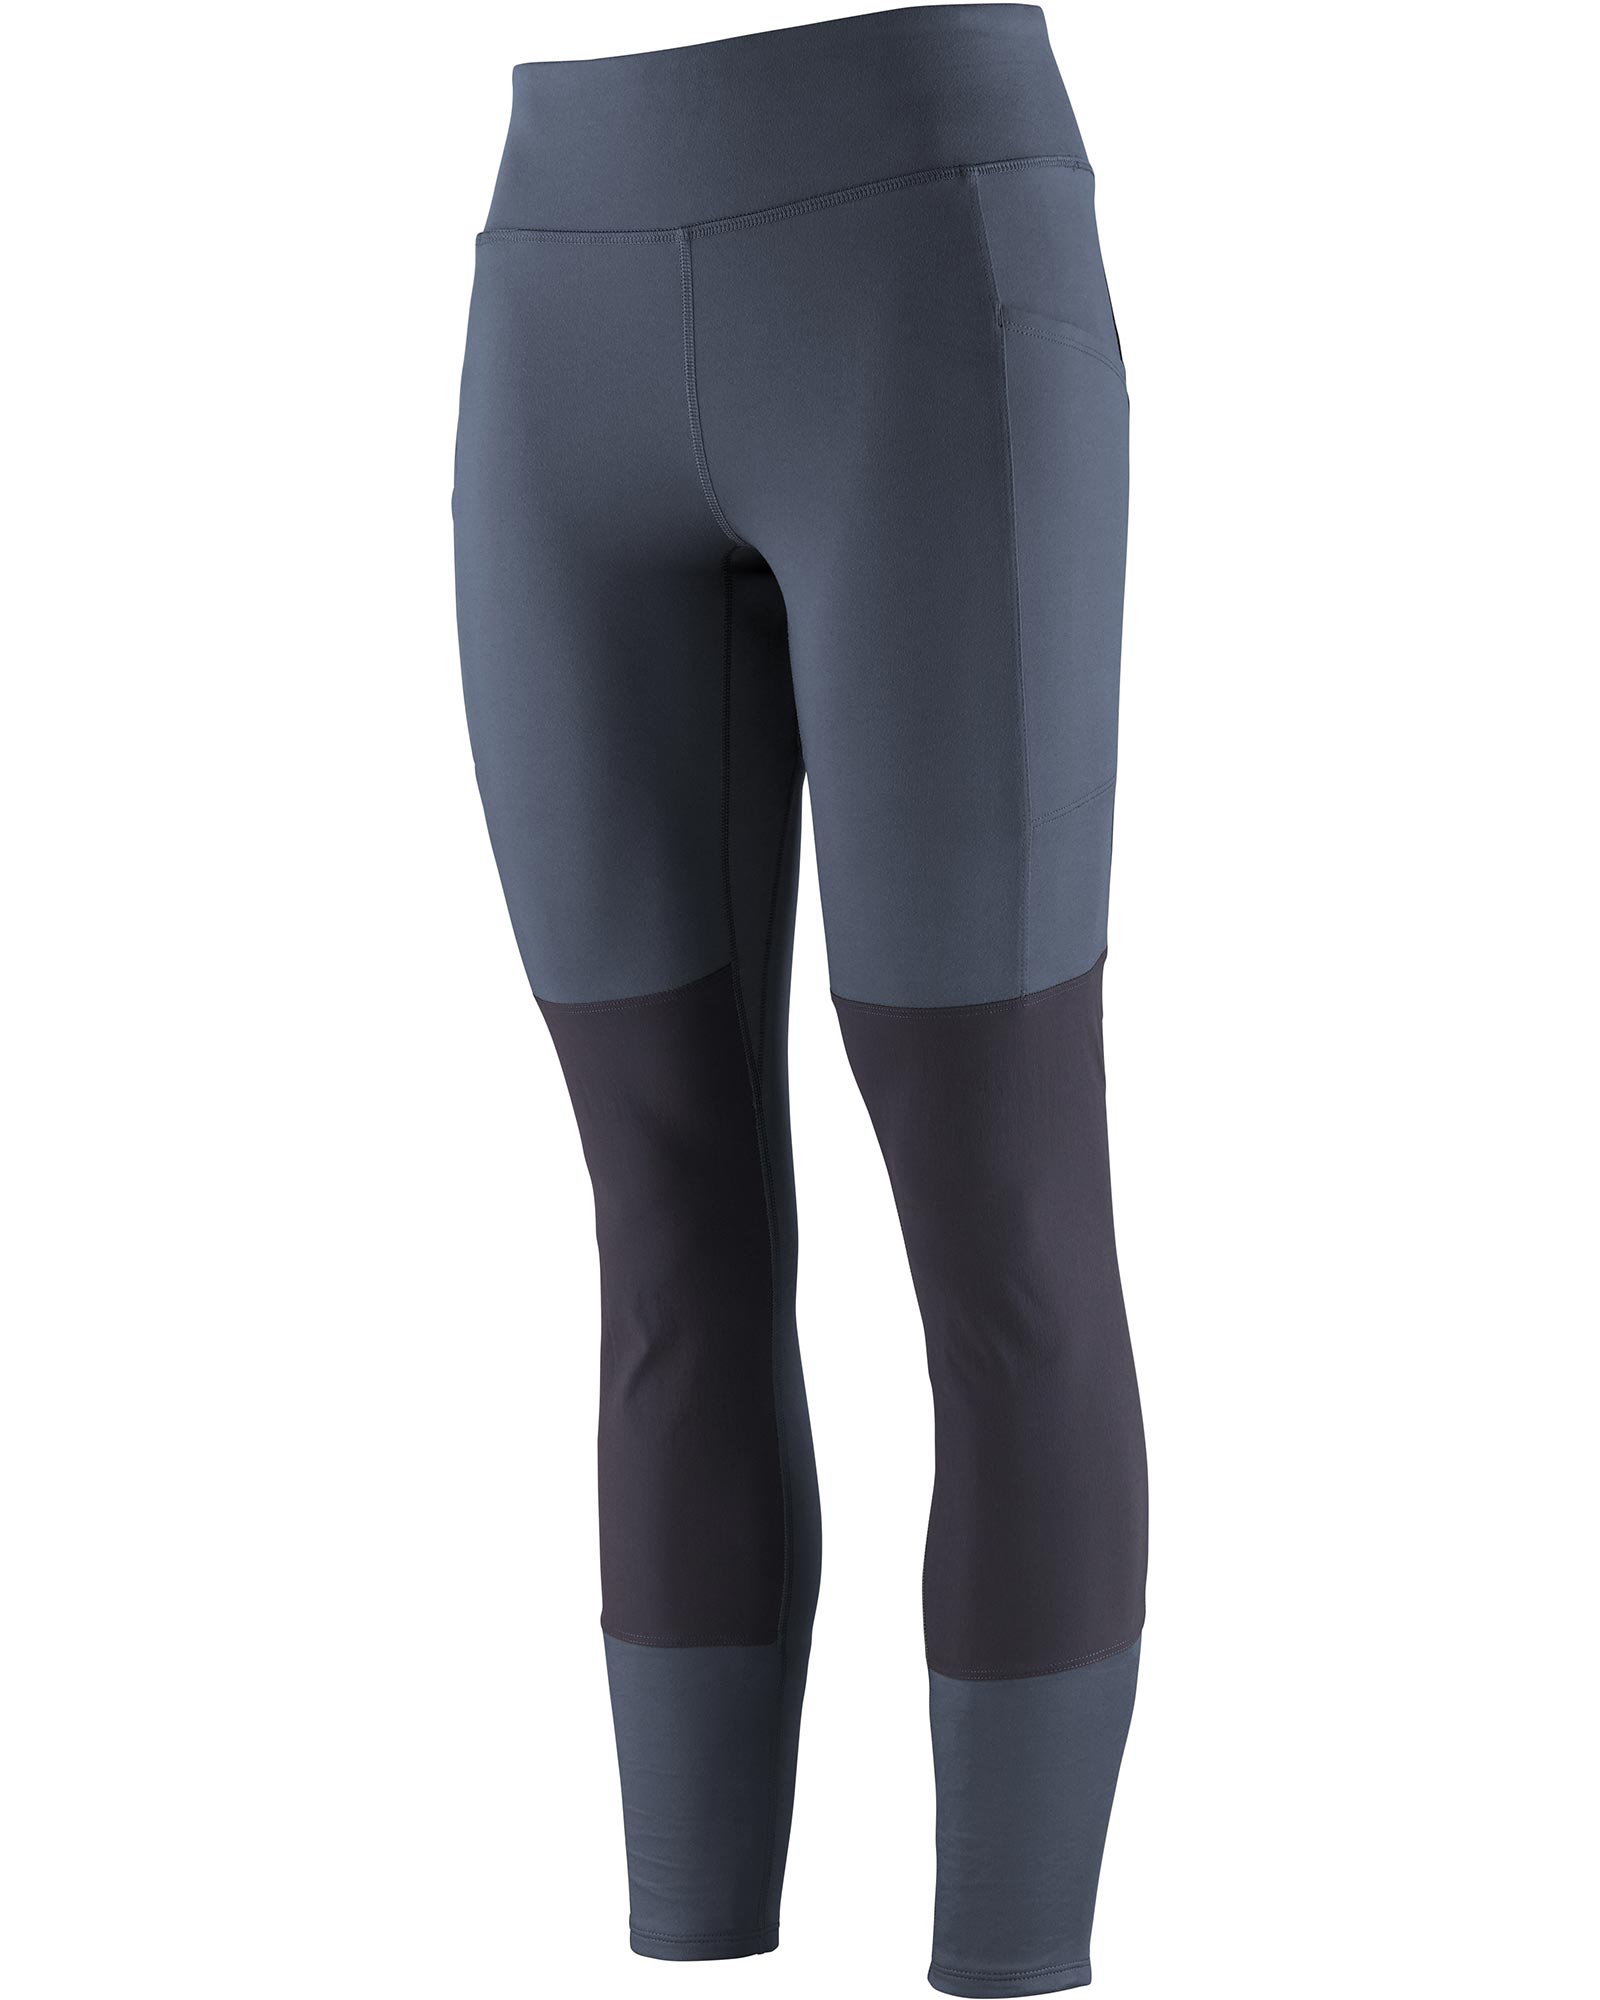 Patagonia Pack Out Women’s Tights - Smoulder Blue XS